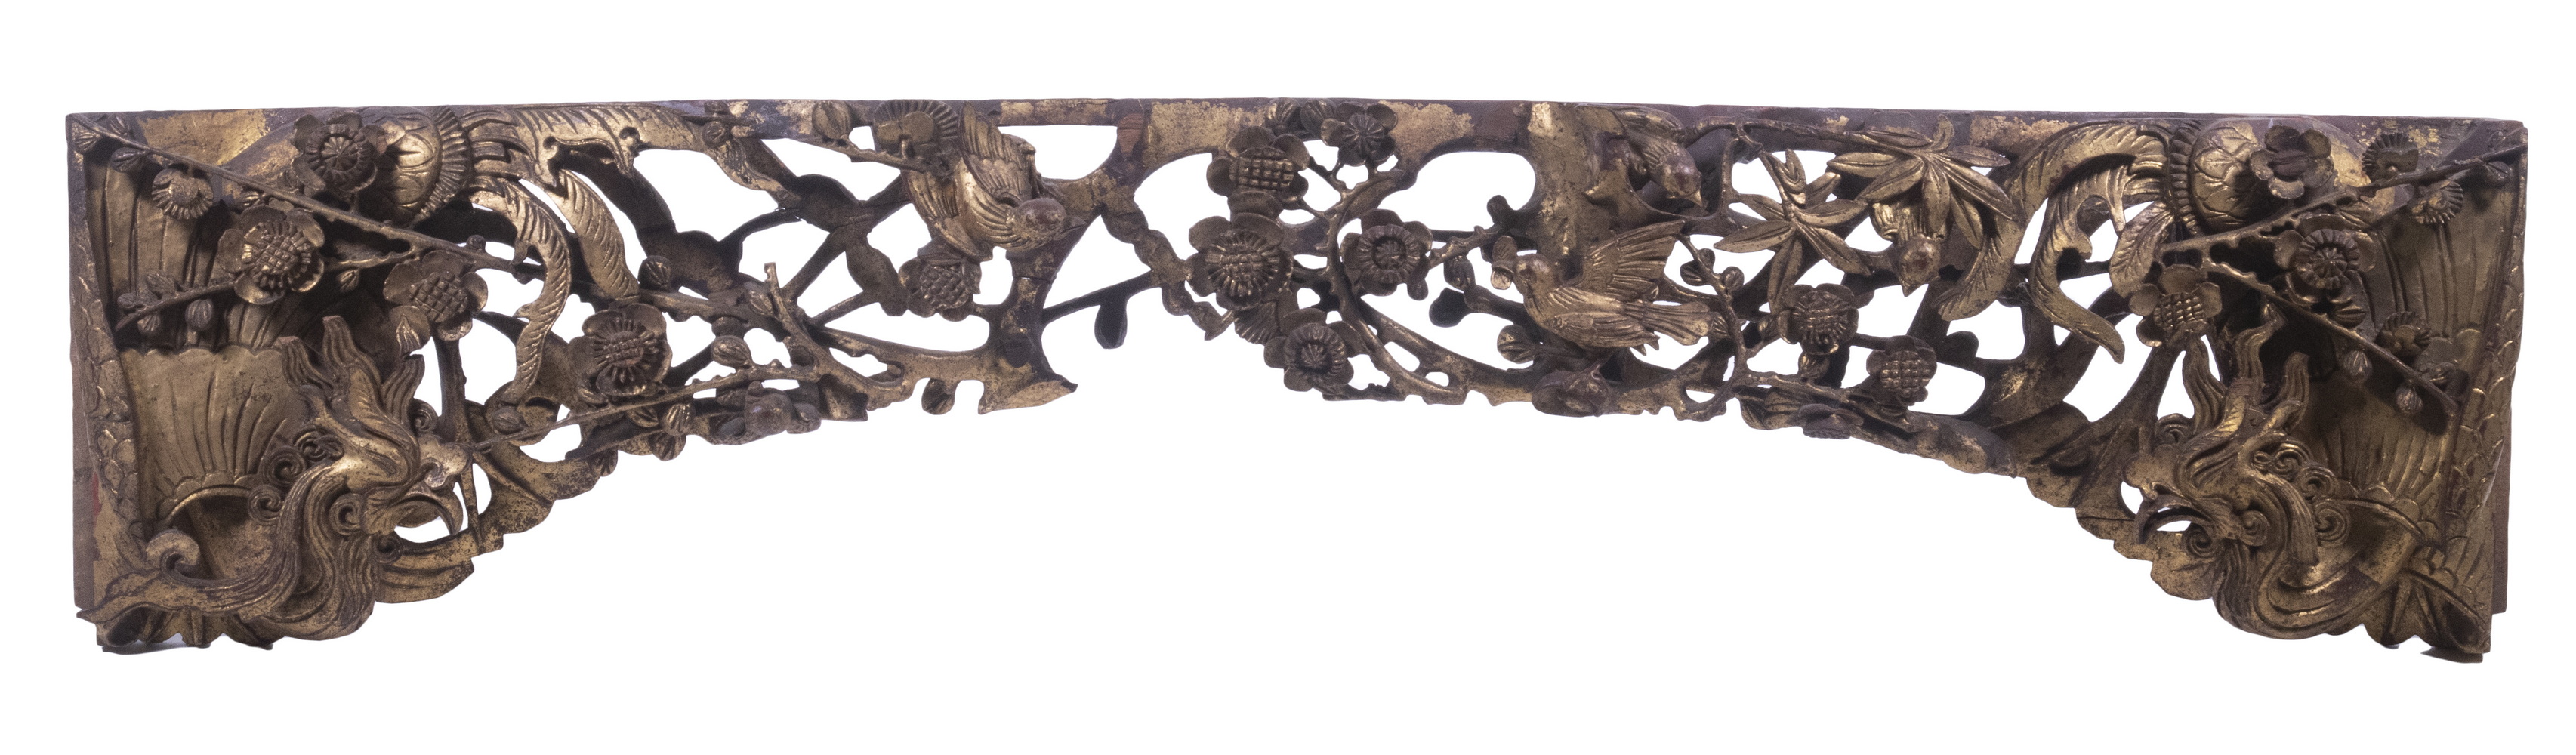 CHINESE CARVED FURNITURE FRAGMENT 2b1d16